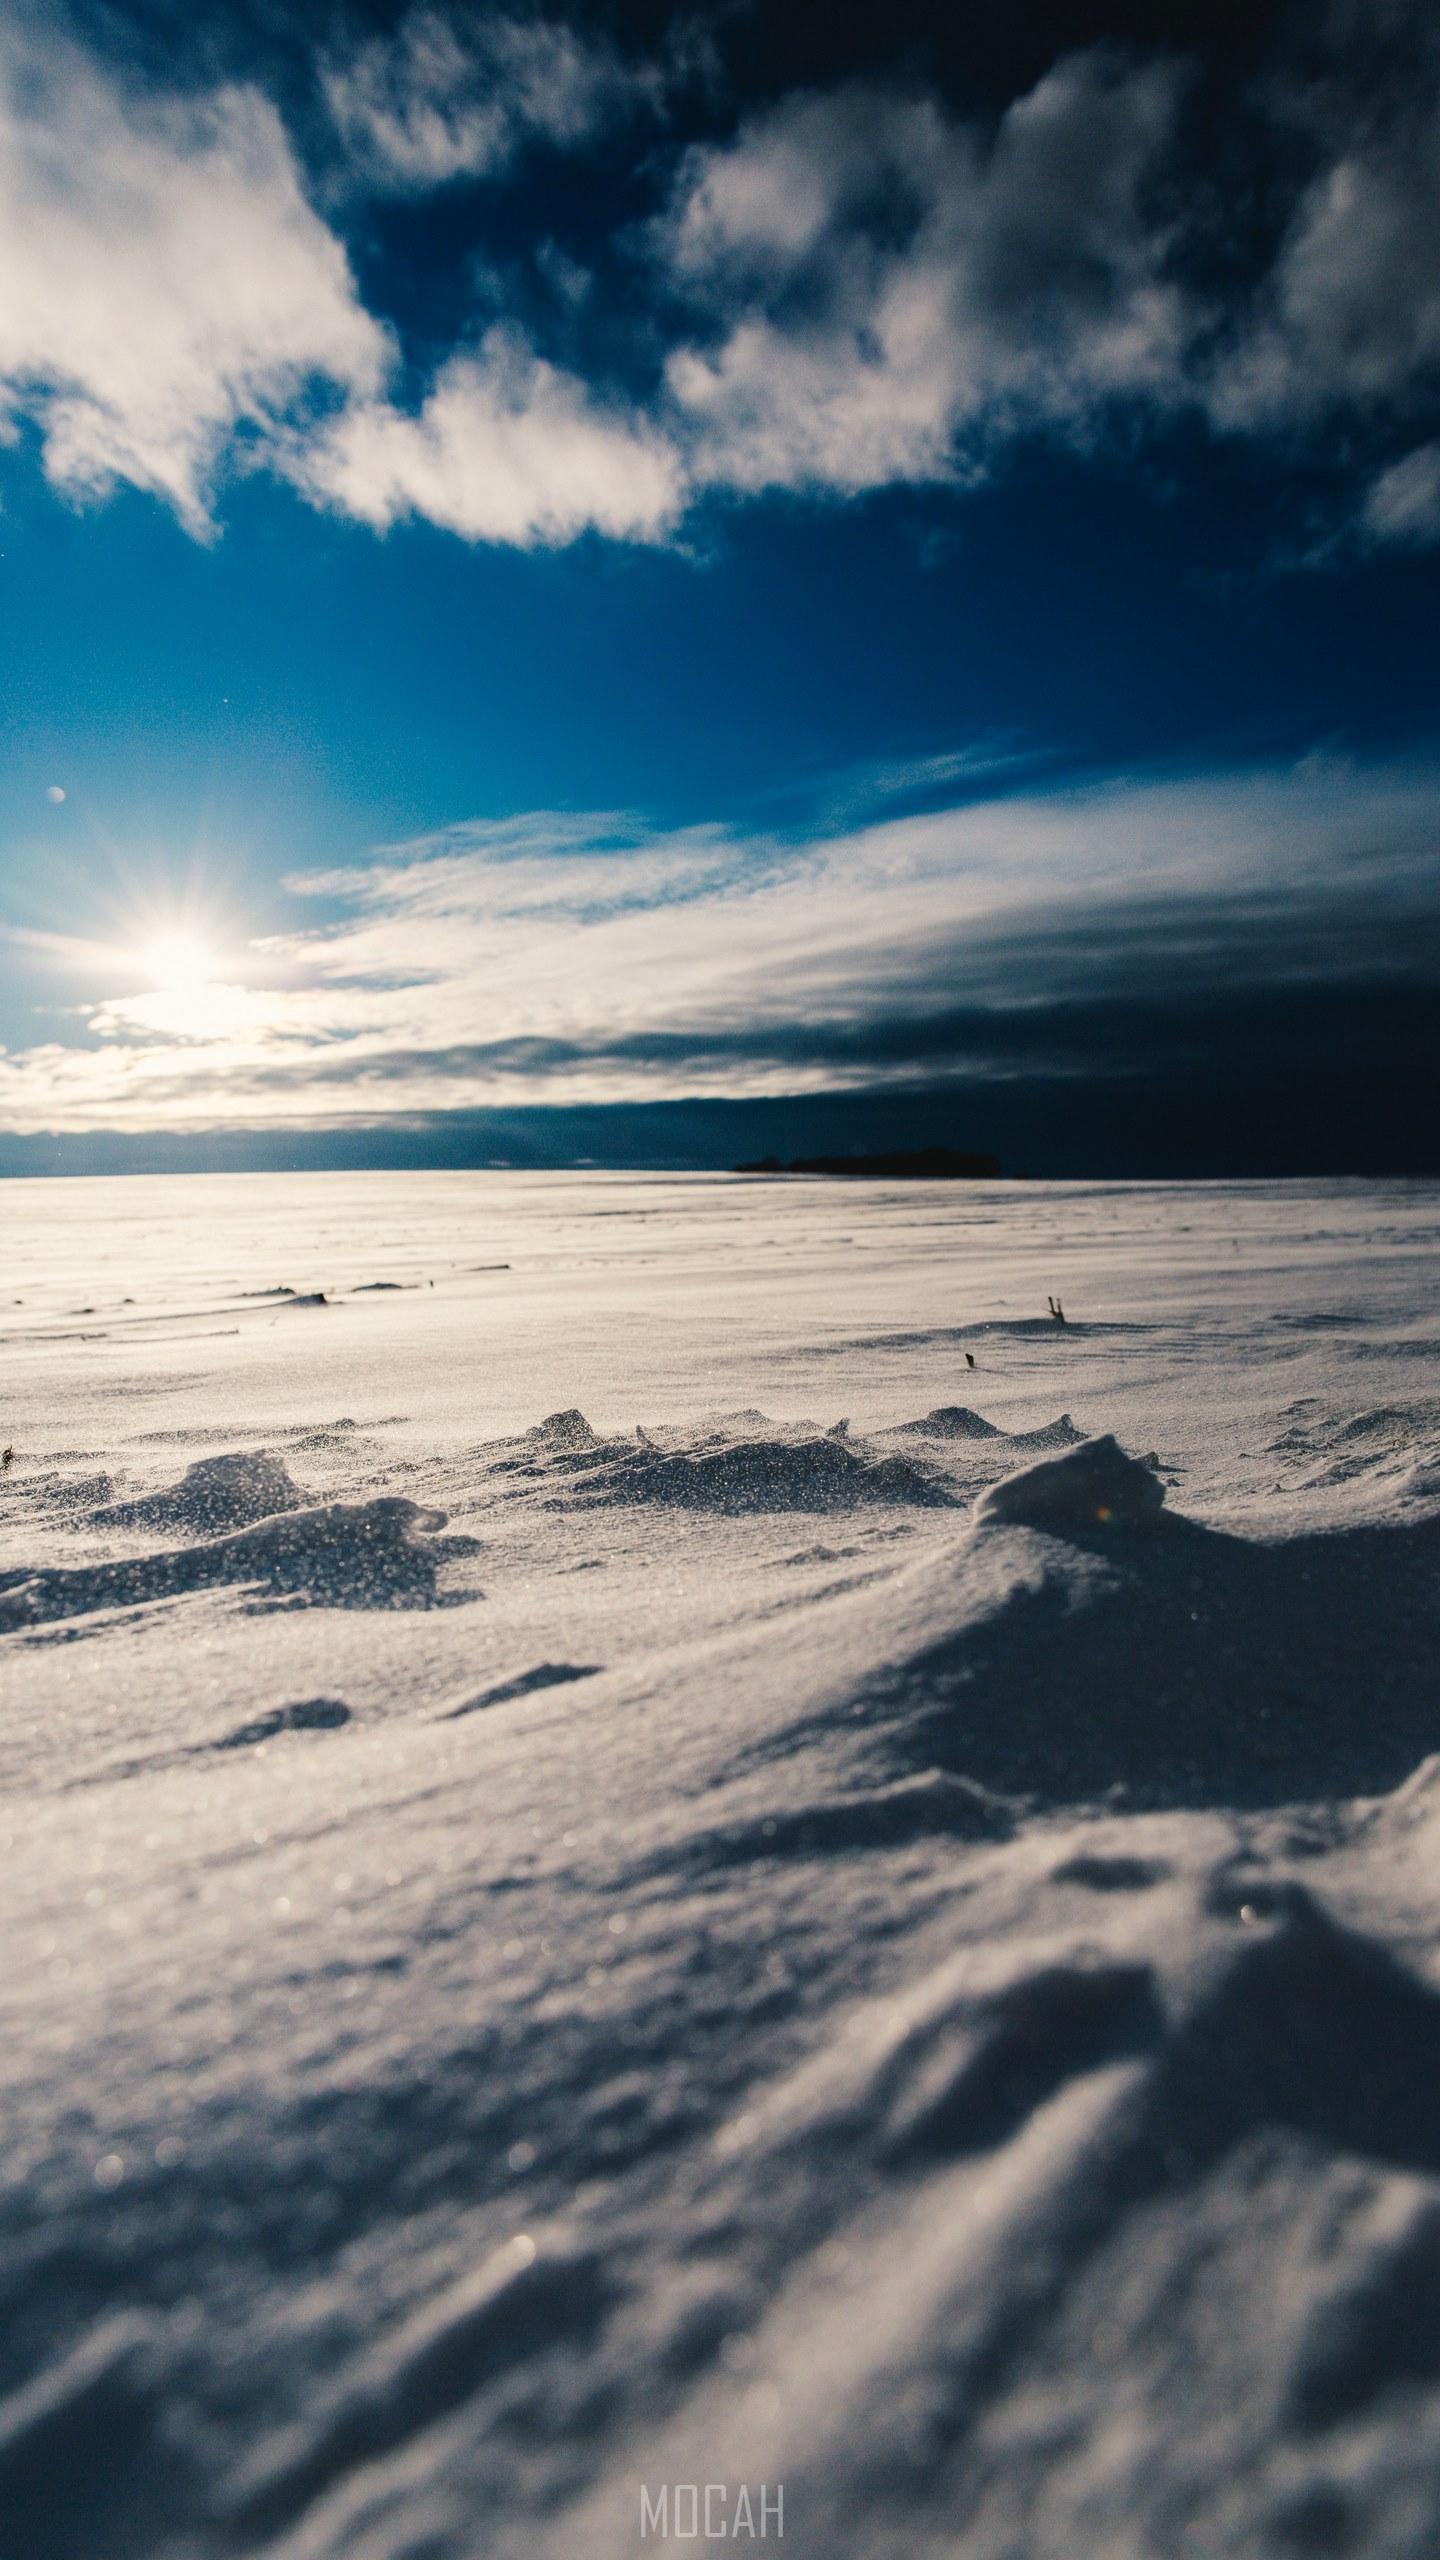 HD wallpaper, Microsoft Lumia 950 Screensaver Hd, A Blue Sky Above White Snow, A Blue Sky In White Clouds With White Snow Fall On The Ground, 1440X2560